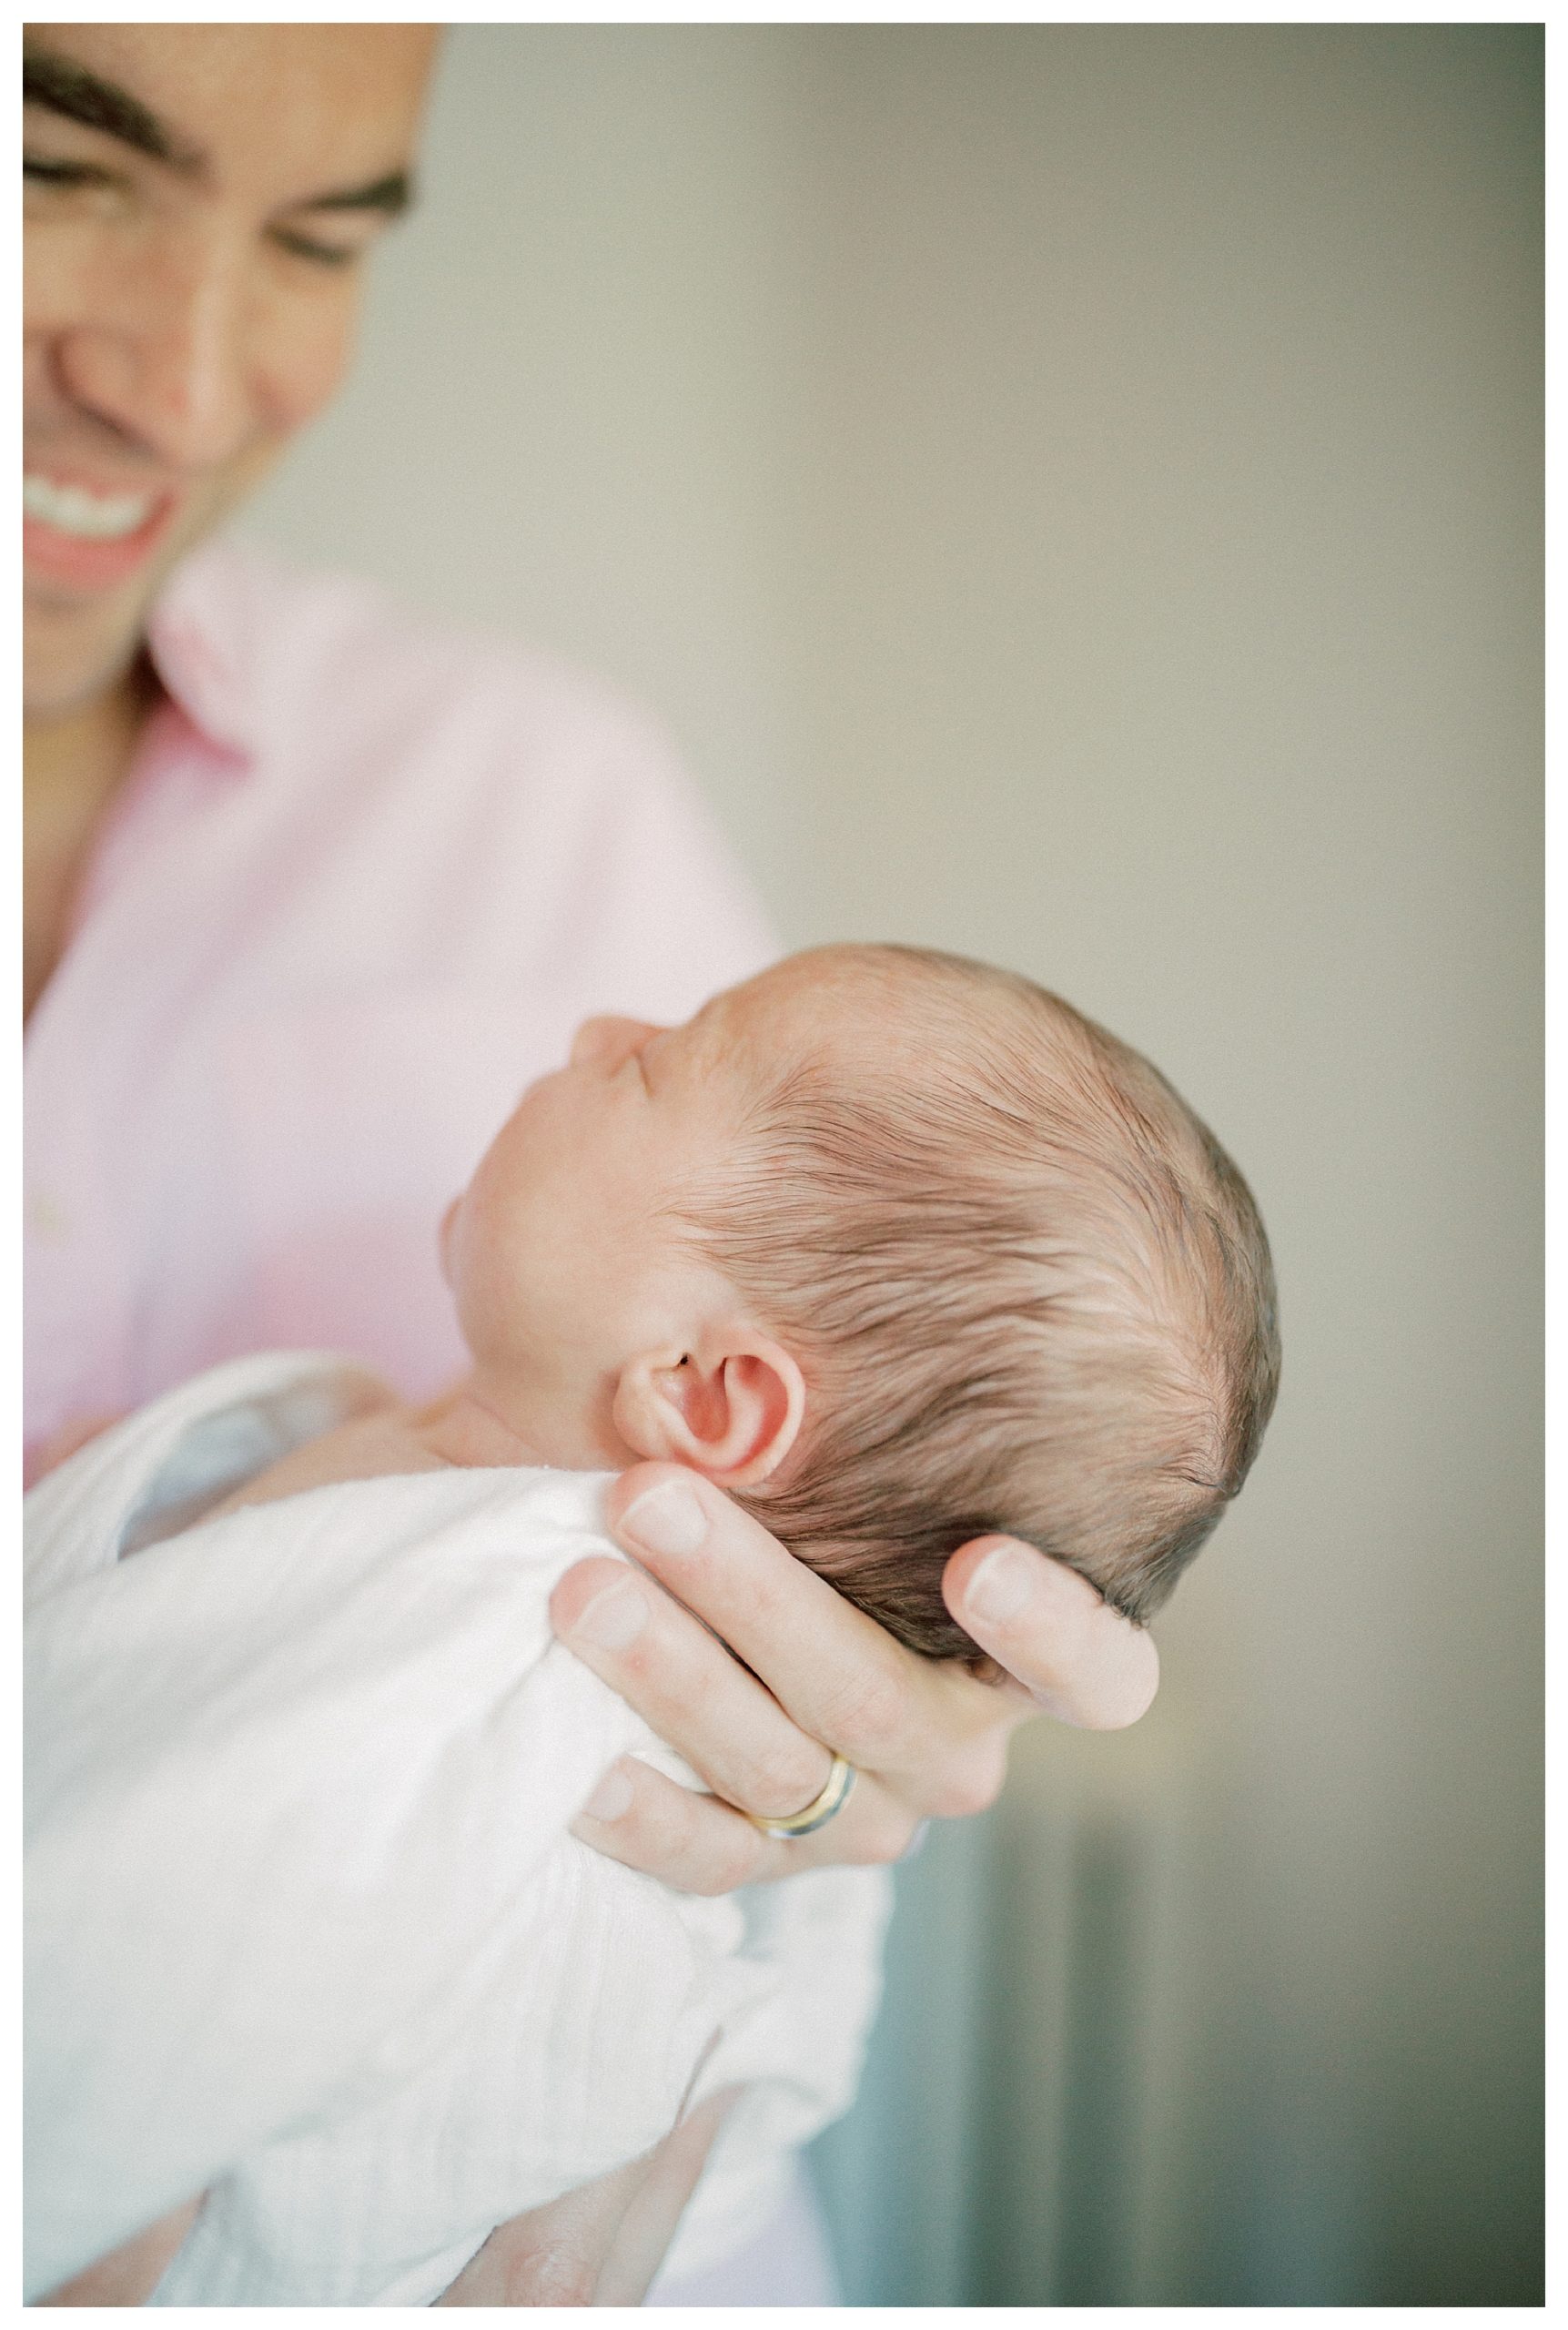 Close-up view of newborn's ears and hair during in-home newborn session.